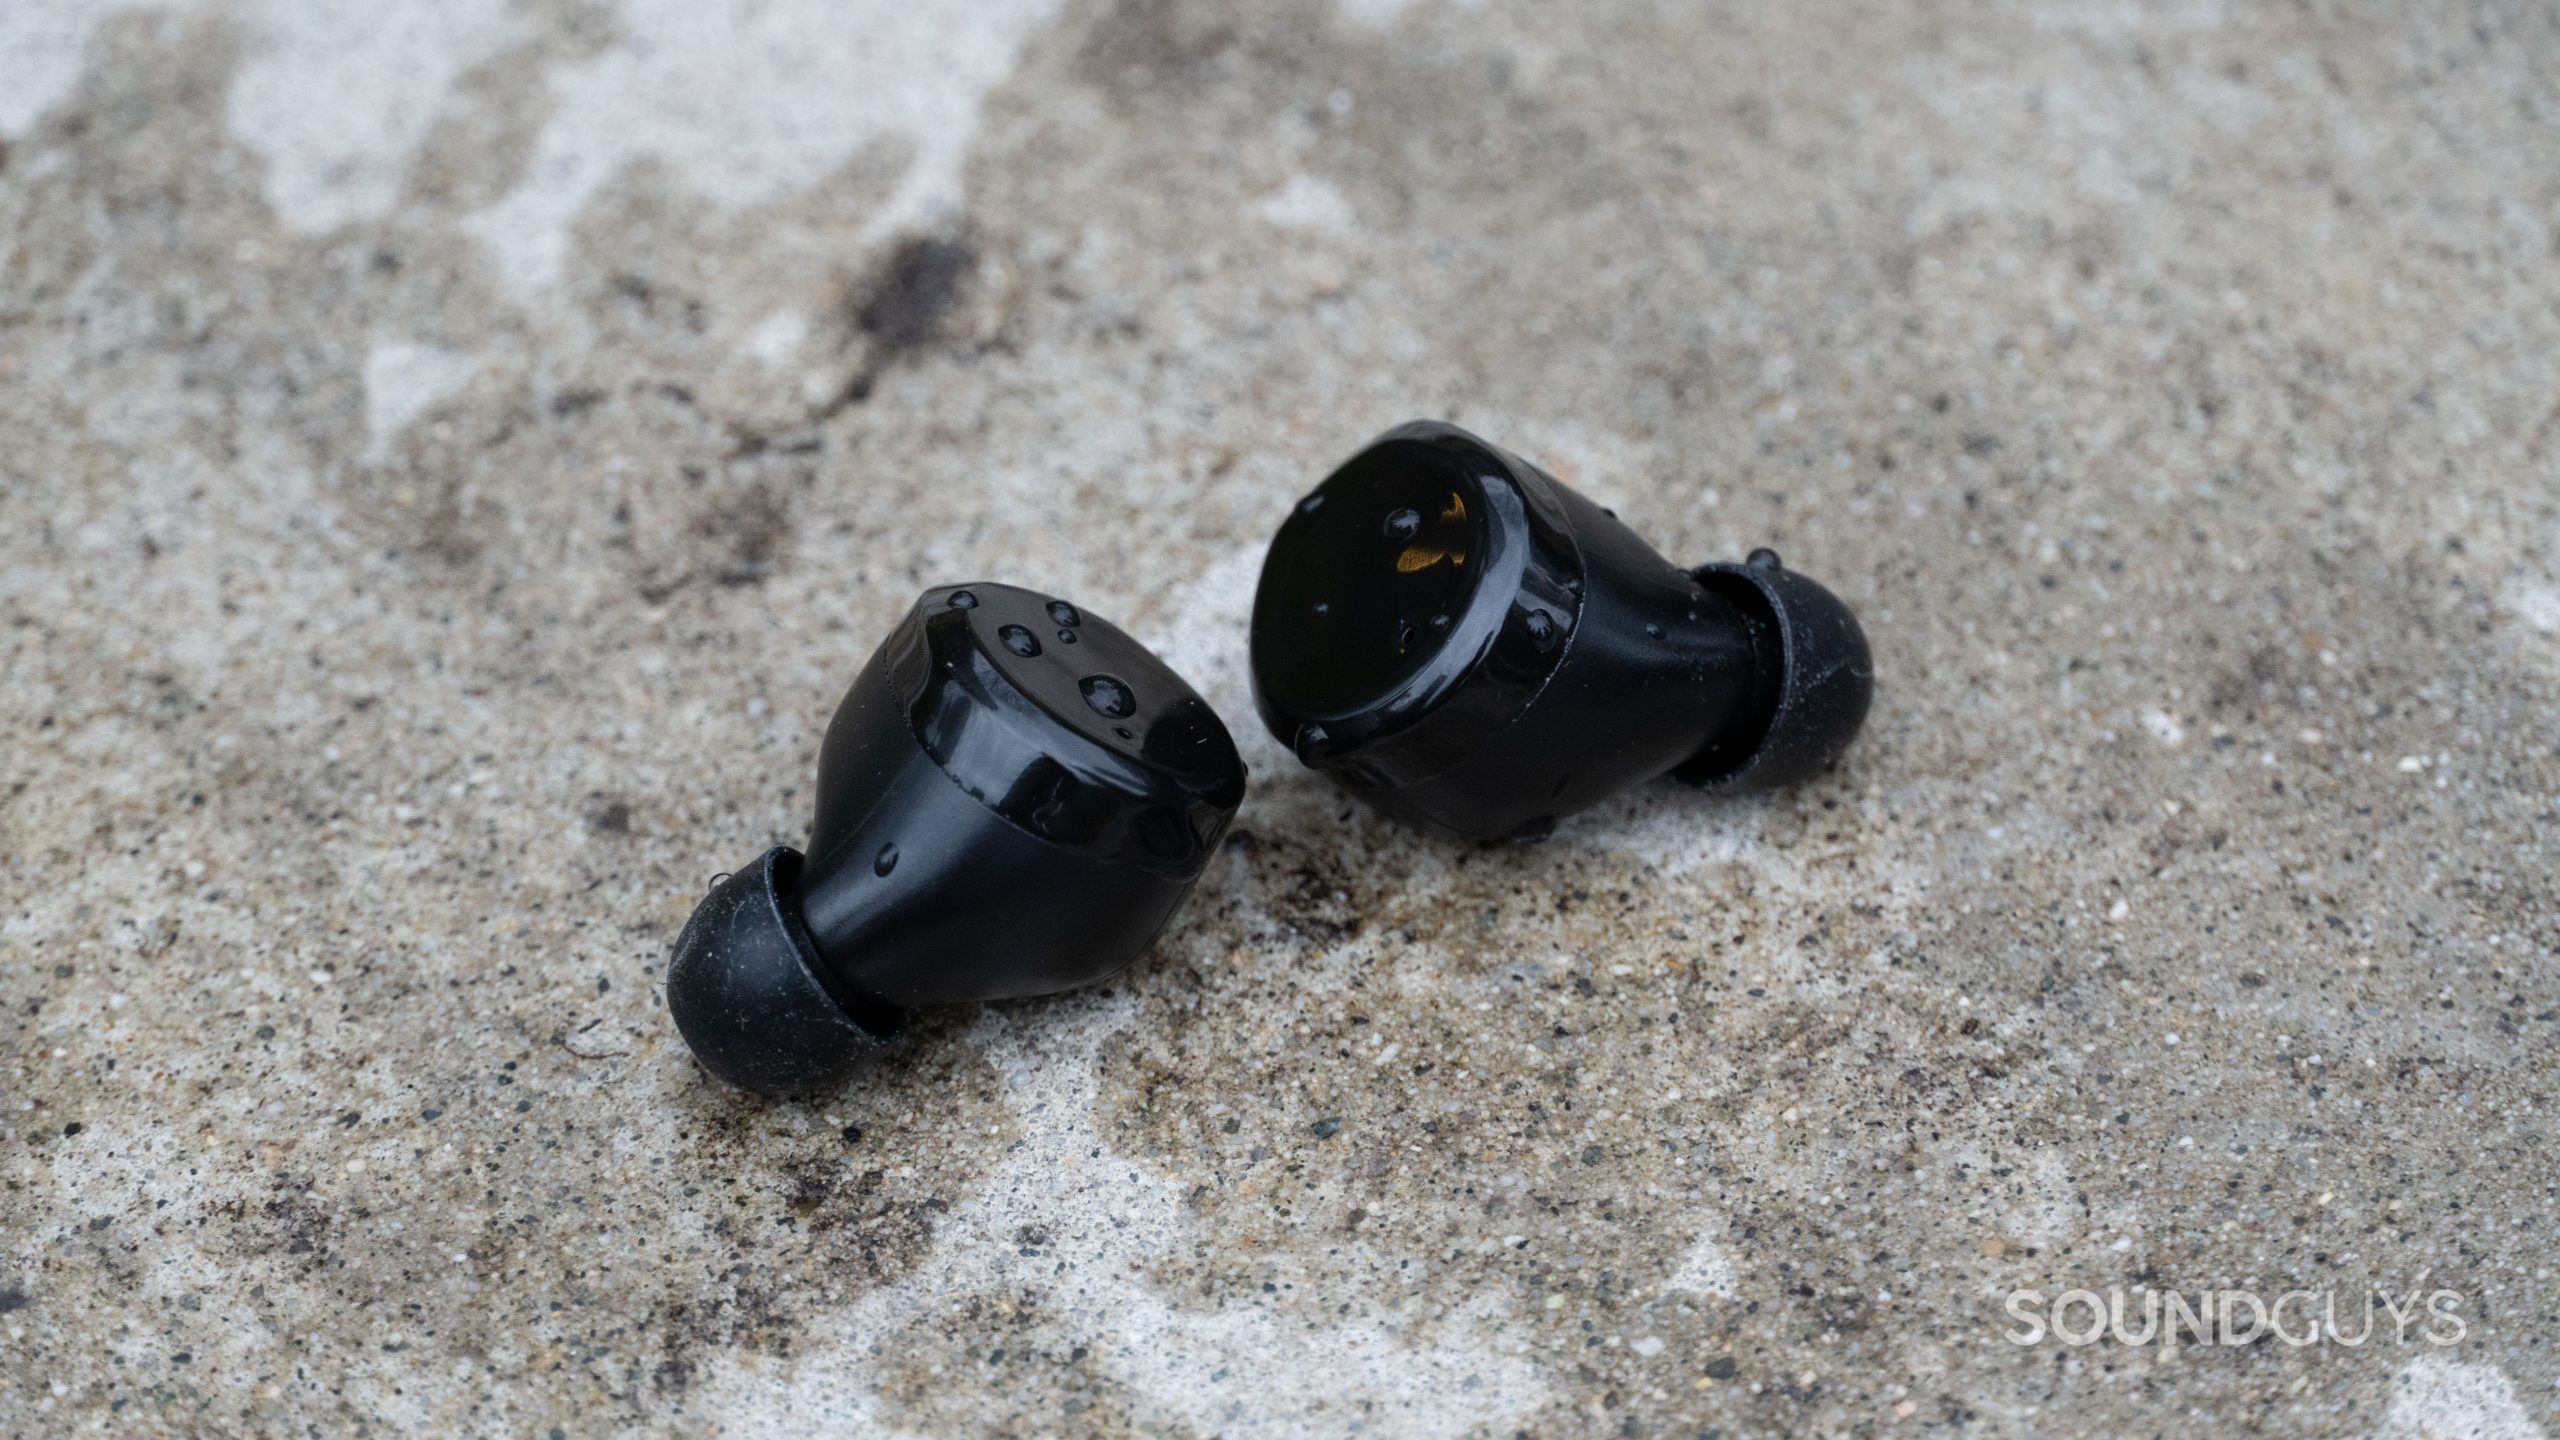 TOZO T12 earbuds outside with water splashed on the earbuds